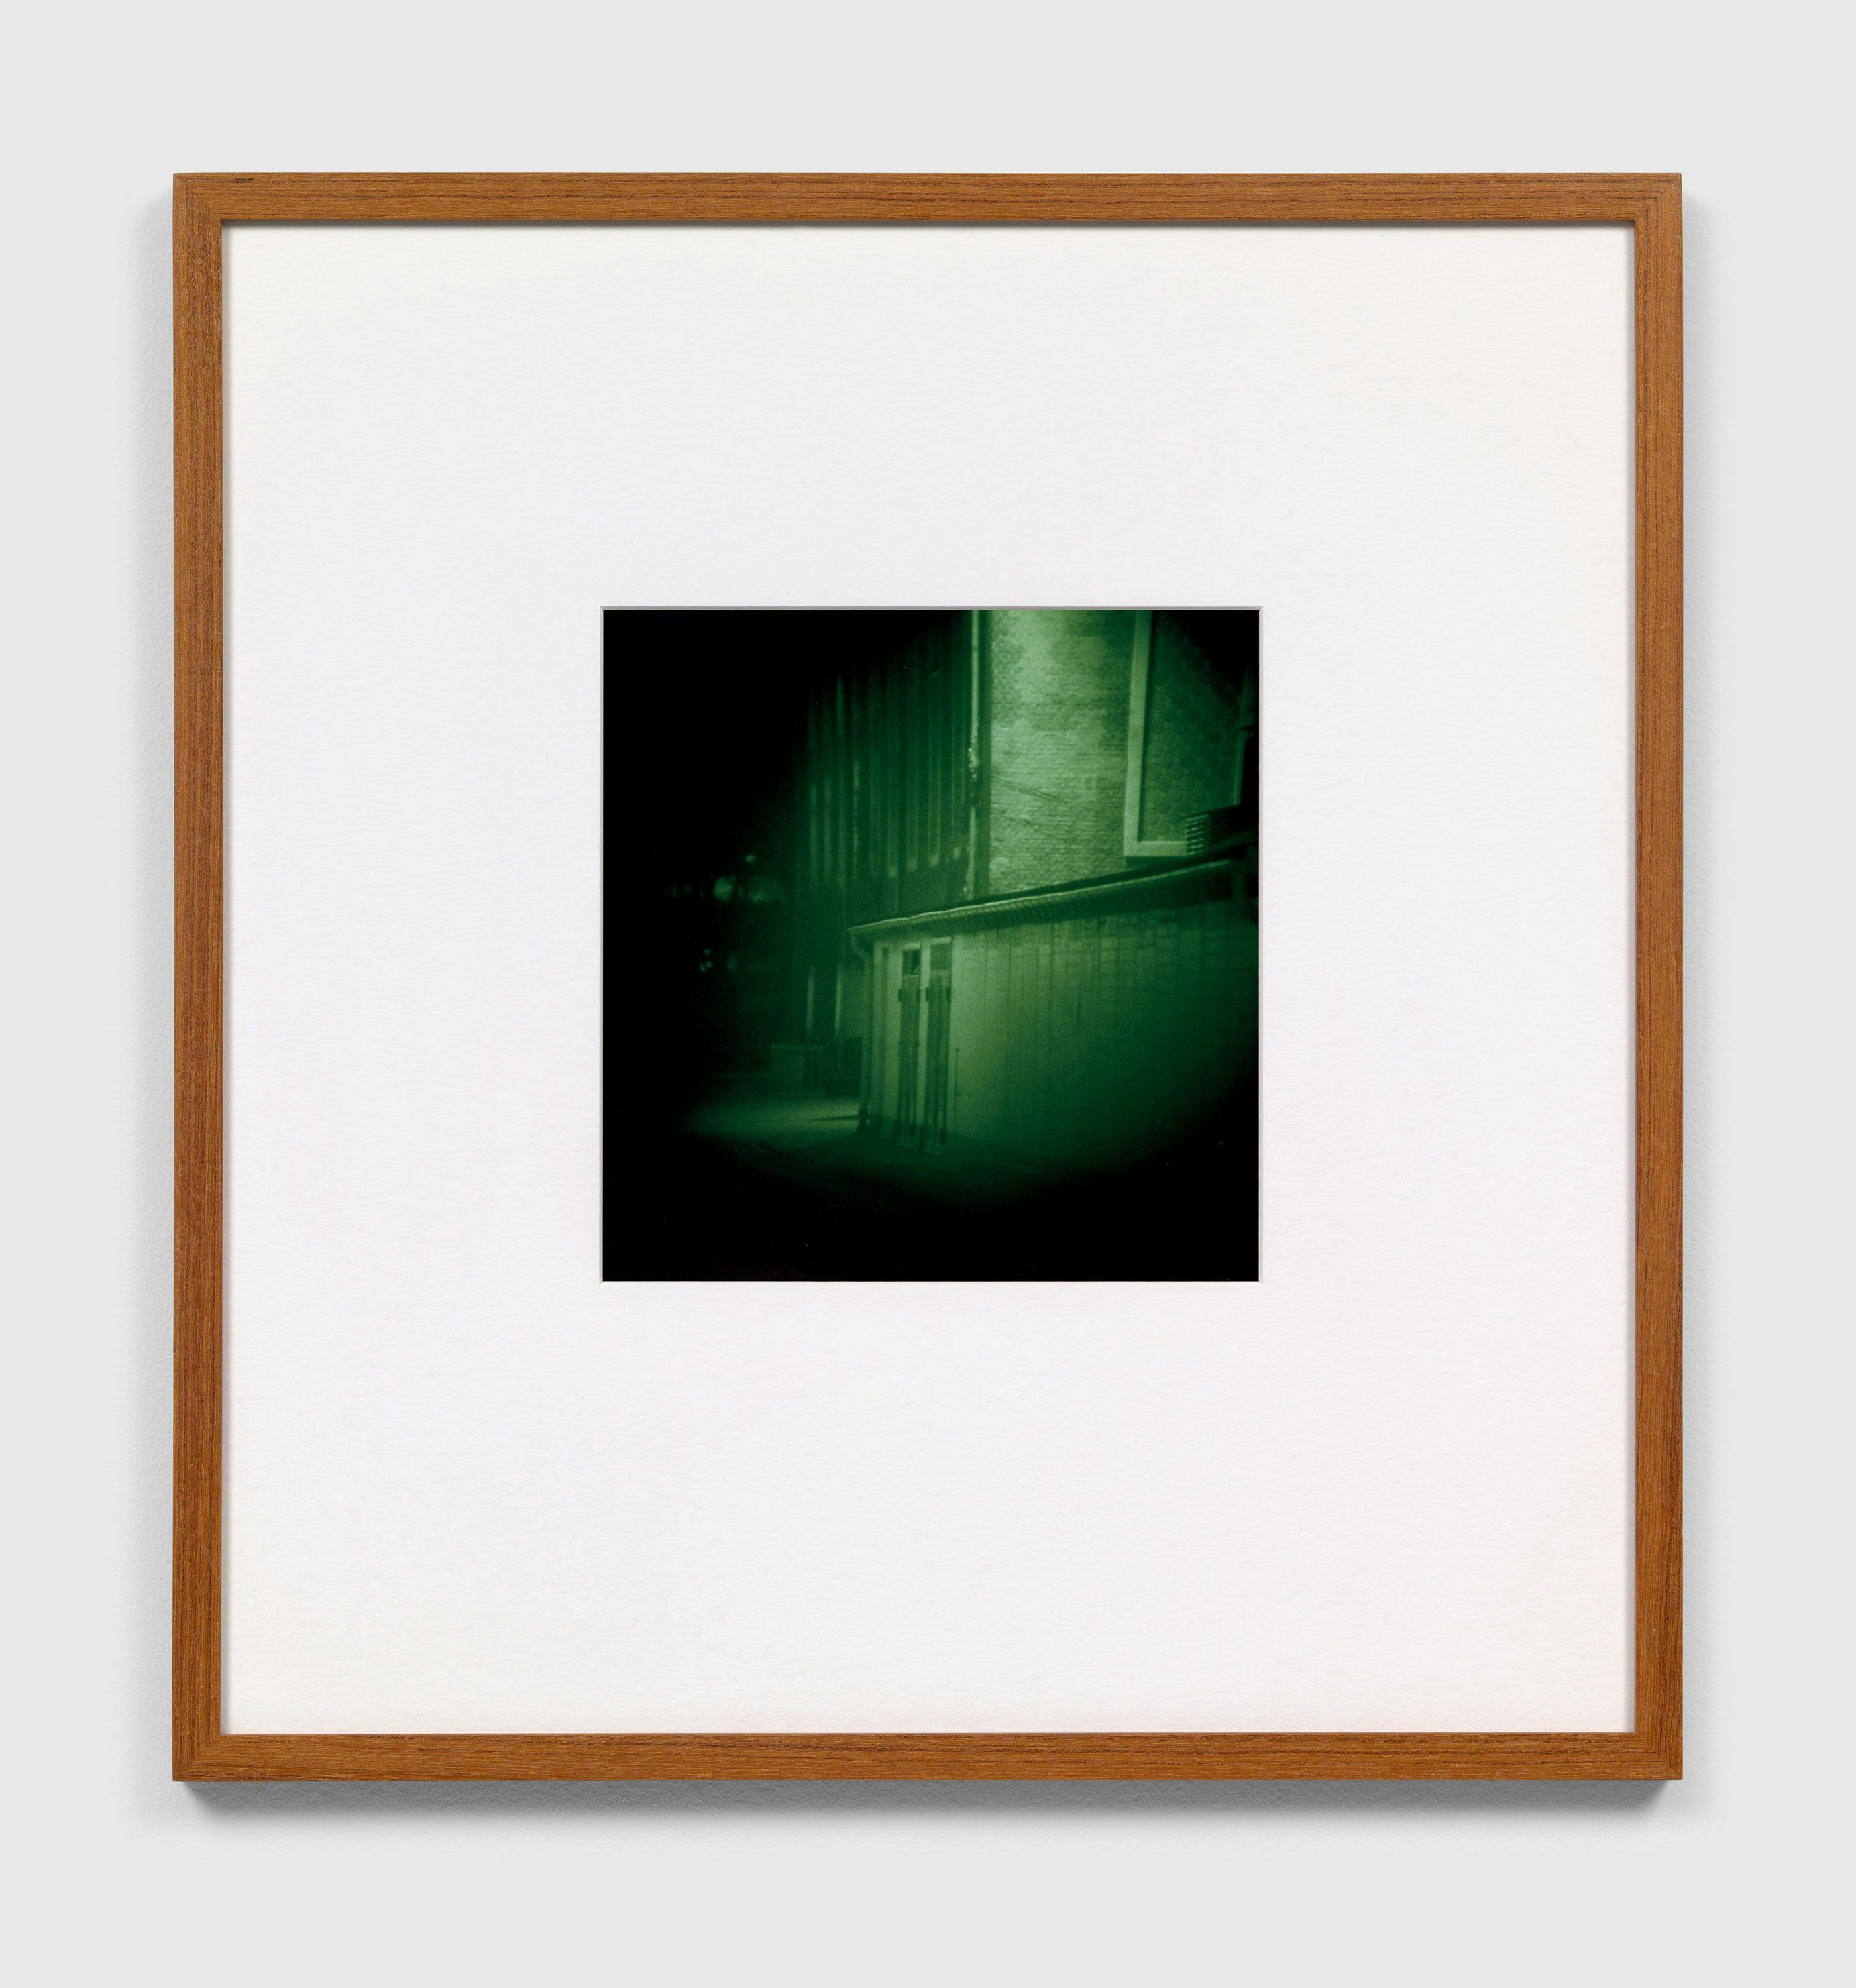 A photograph by Thomas Ruff, titled Nacht 5 I, dated 1992.